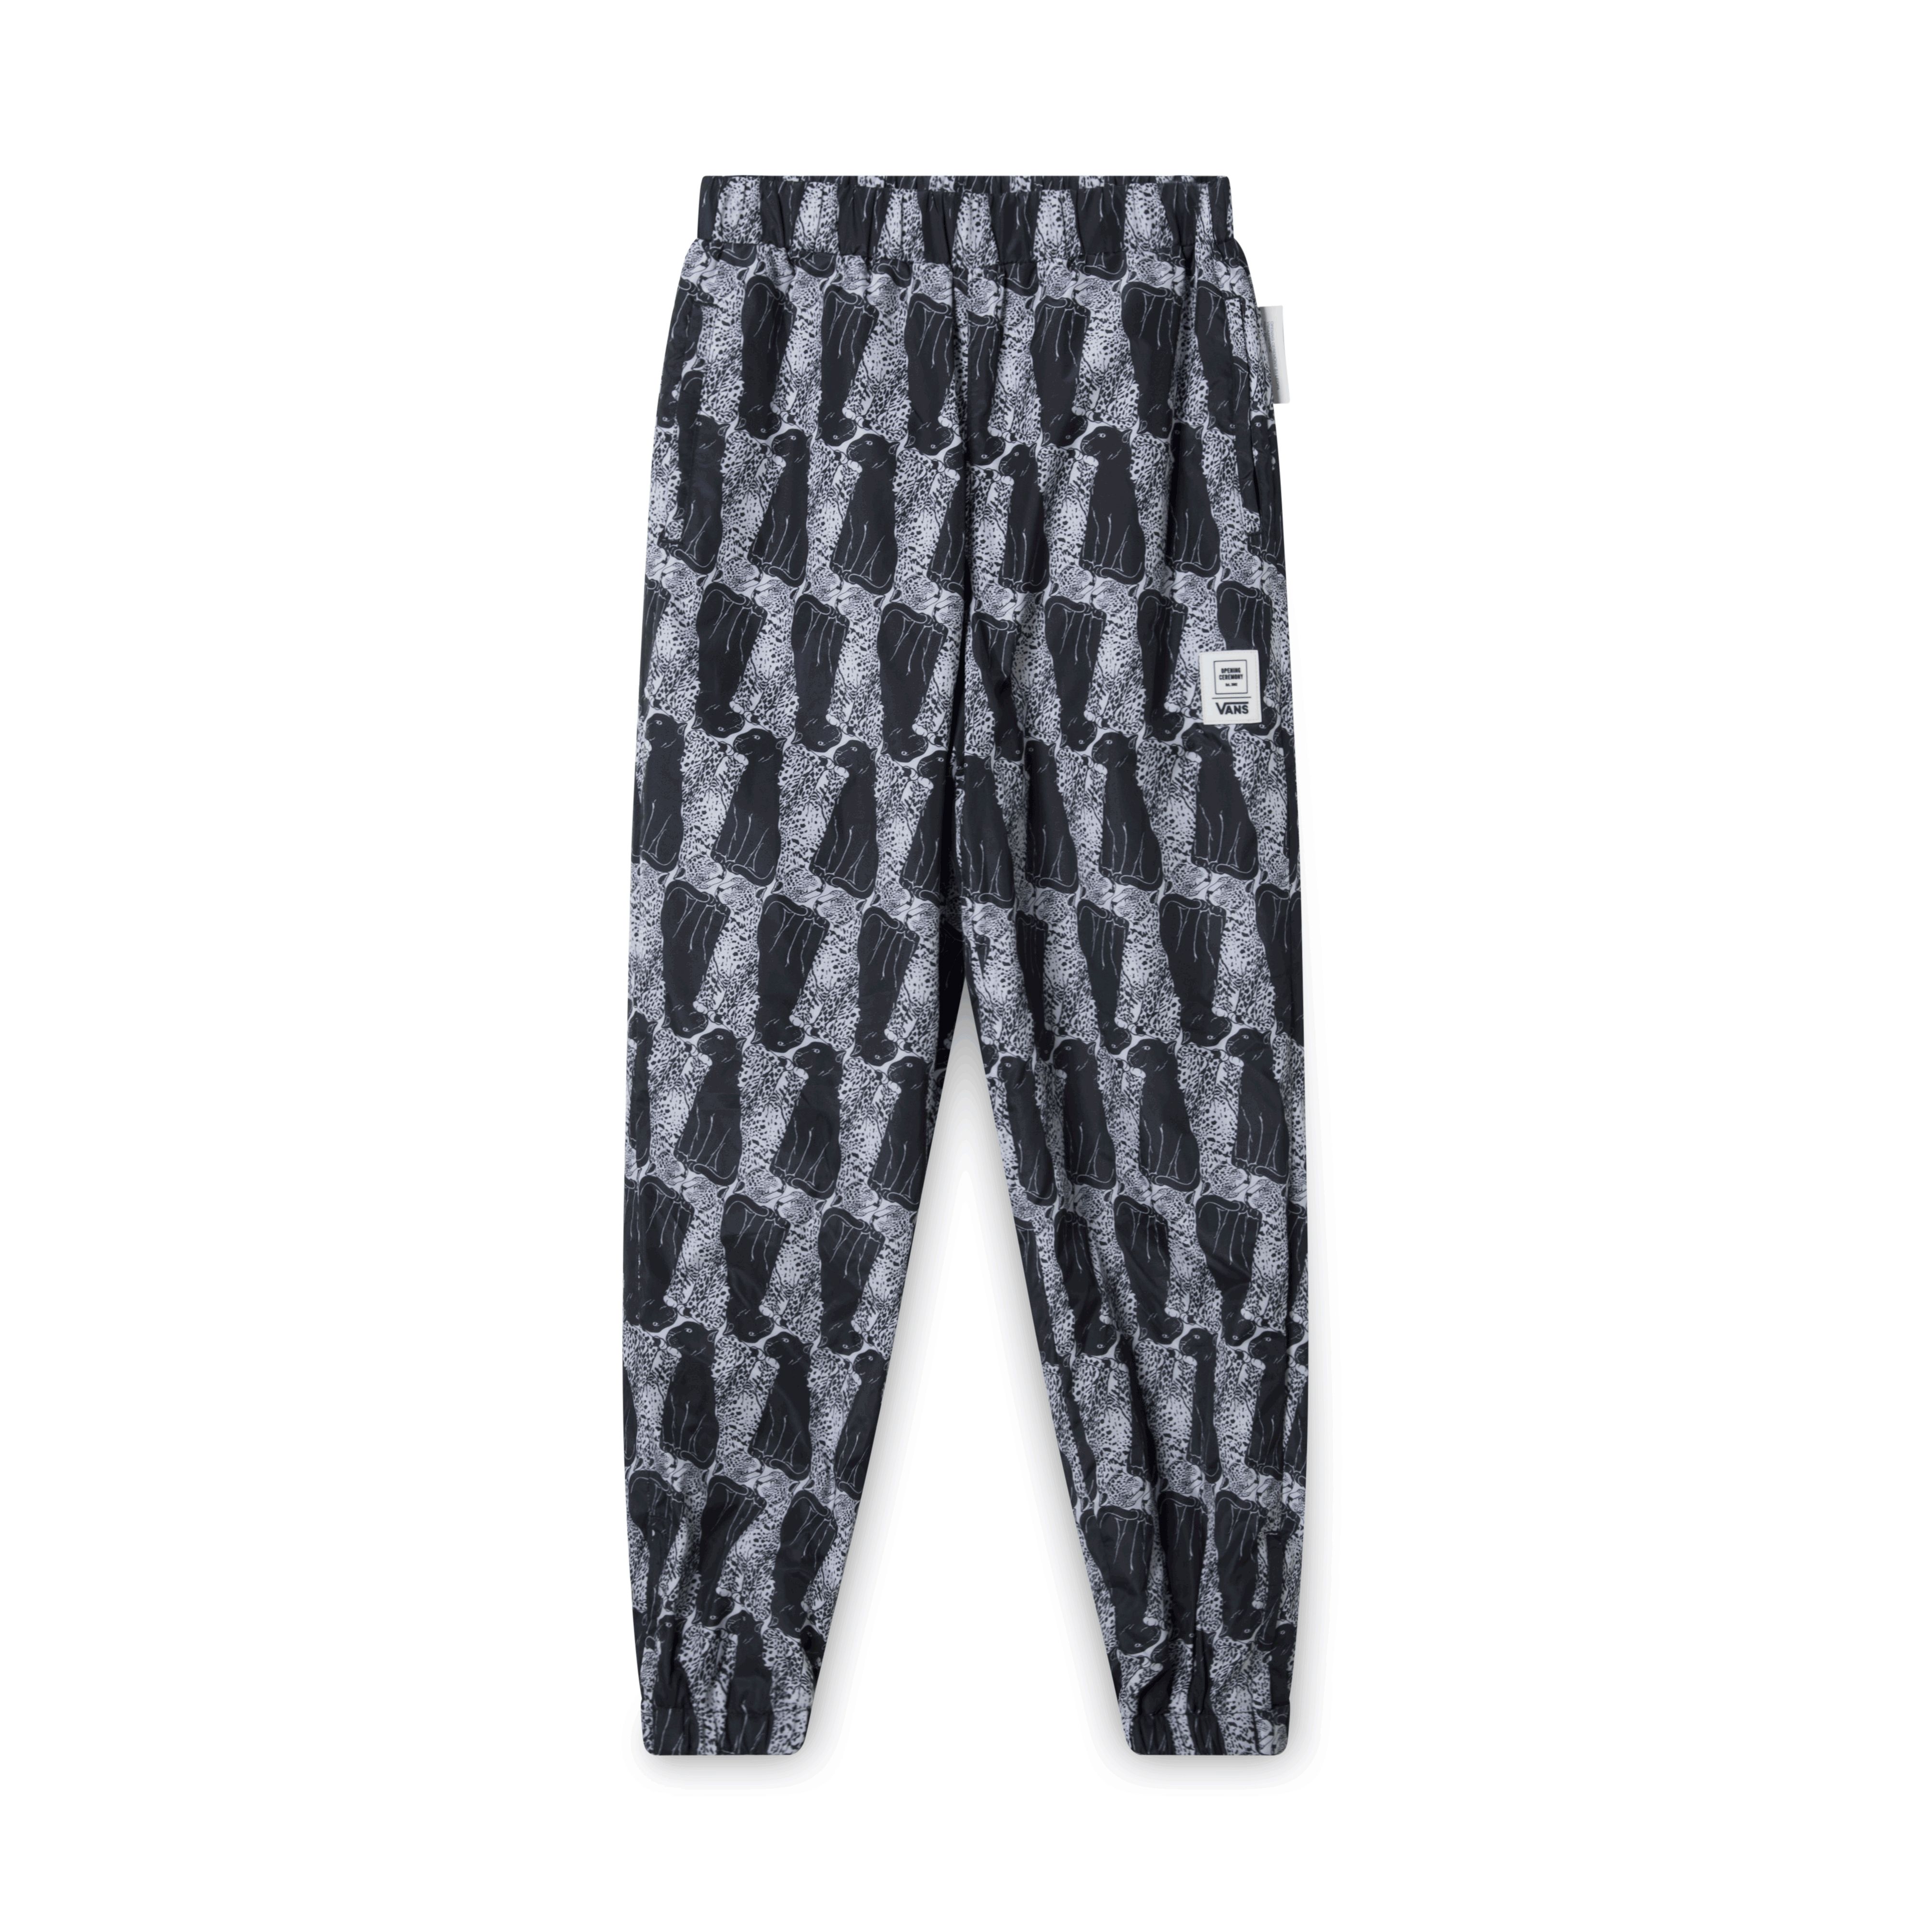 Vans x Opening Ceremony Leopard Pant by Justine Agana | Basic.Space